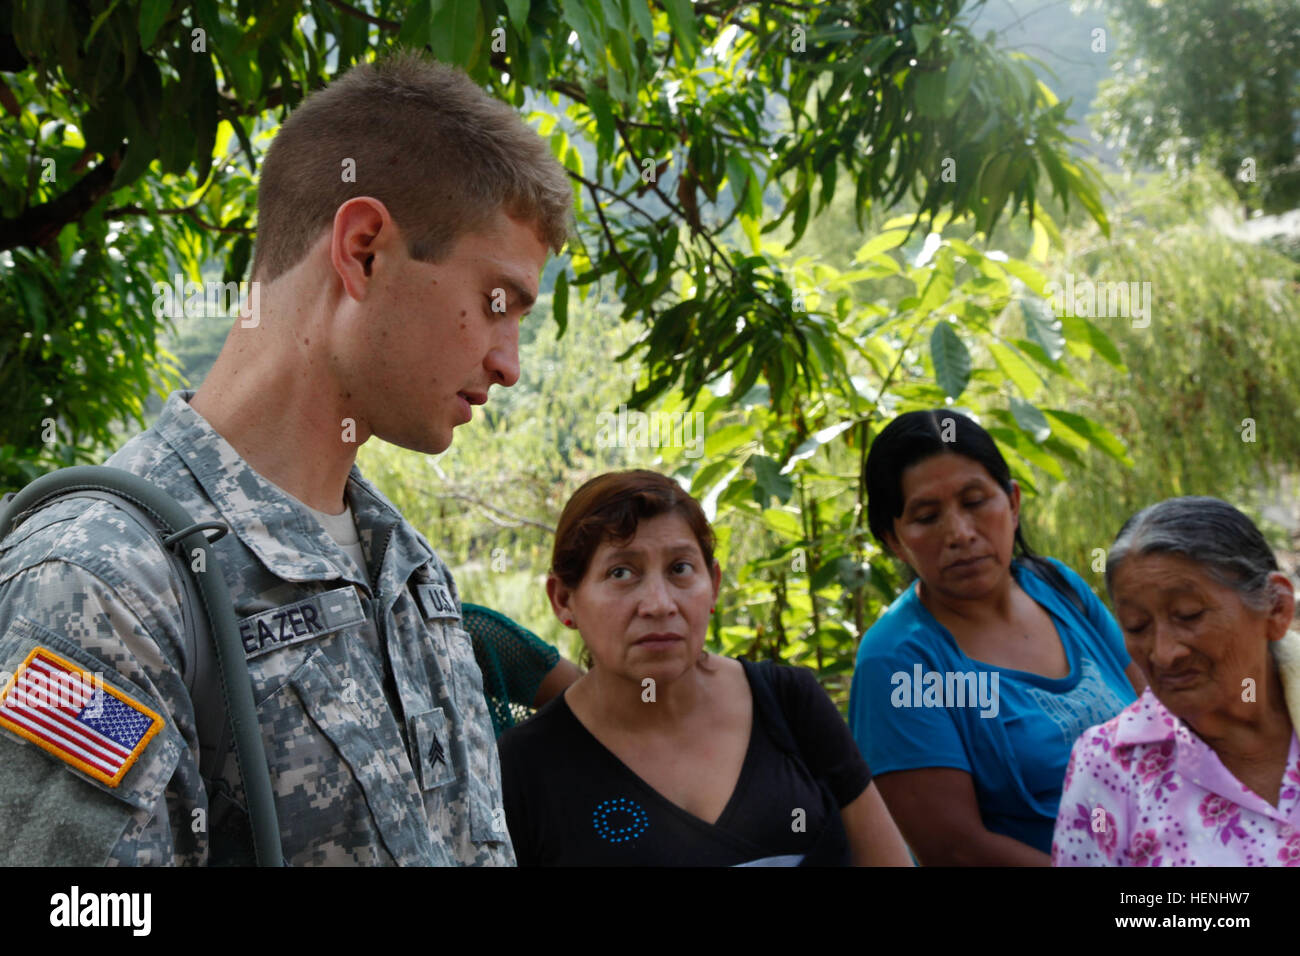 U.S. Army Sgt. Mitch Beazer with the 300th Military Intelligence speaks with a Guatemalan family about the quality of care they received at the Medical Readiness Training Exercise during Beyond the Horizon, at Rio Grande, Guatemala, on June 3 2014. Beyond the Horizon is an annual exercise that embraces the partnership between the United States and Guatemala, to provide focused humanitarian assistance through various medical, dental, and civic action programs. (U.S. Army photo by Pfc. Josue Mayorga/released) Beyond The Horizon 2014, Guatemala 140603-A-GK700-026 Stock Photo